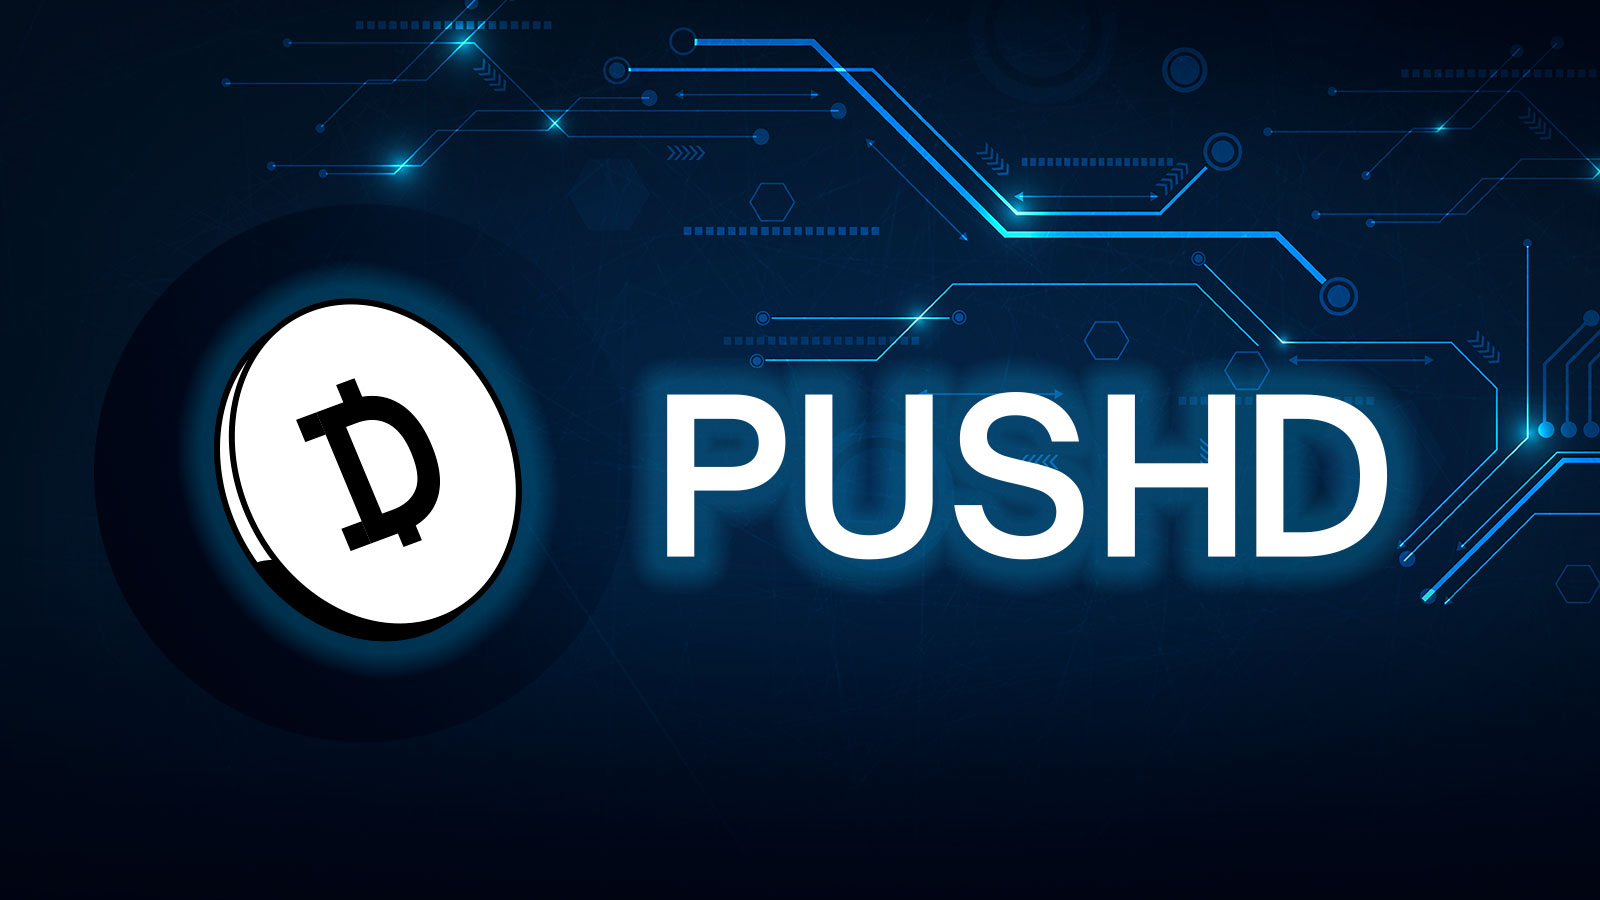 Pushd (PUSHD) Pre-Sale Opens New Opportunities while XAI (XAI) and Bitcoin Cash (BCH) Top Altcoins Remain In Spotlight